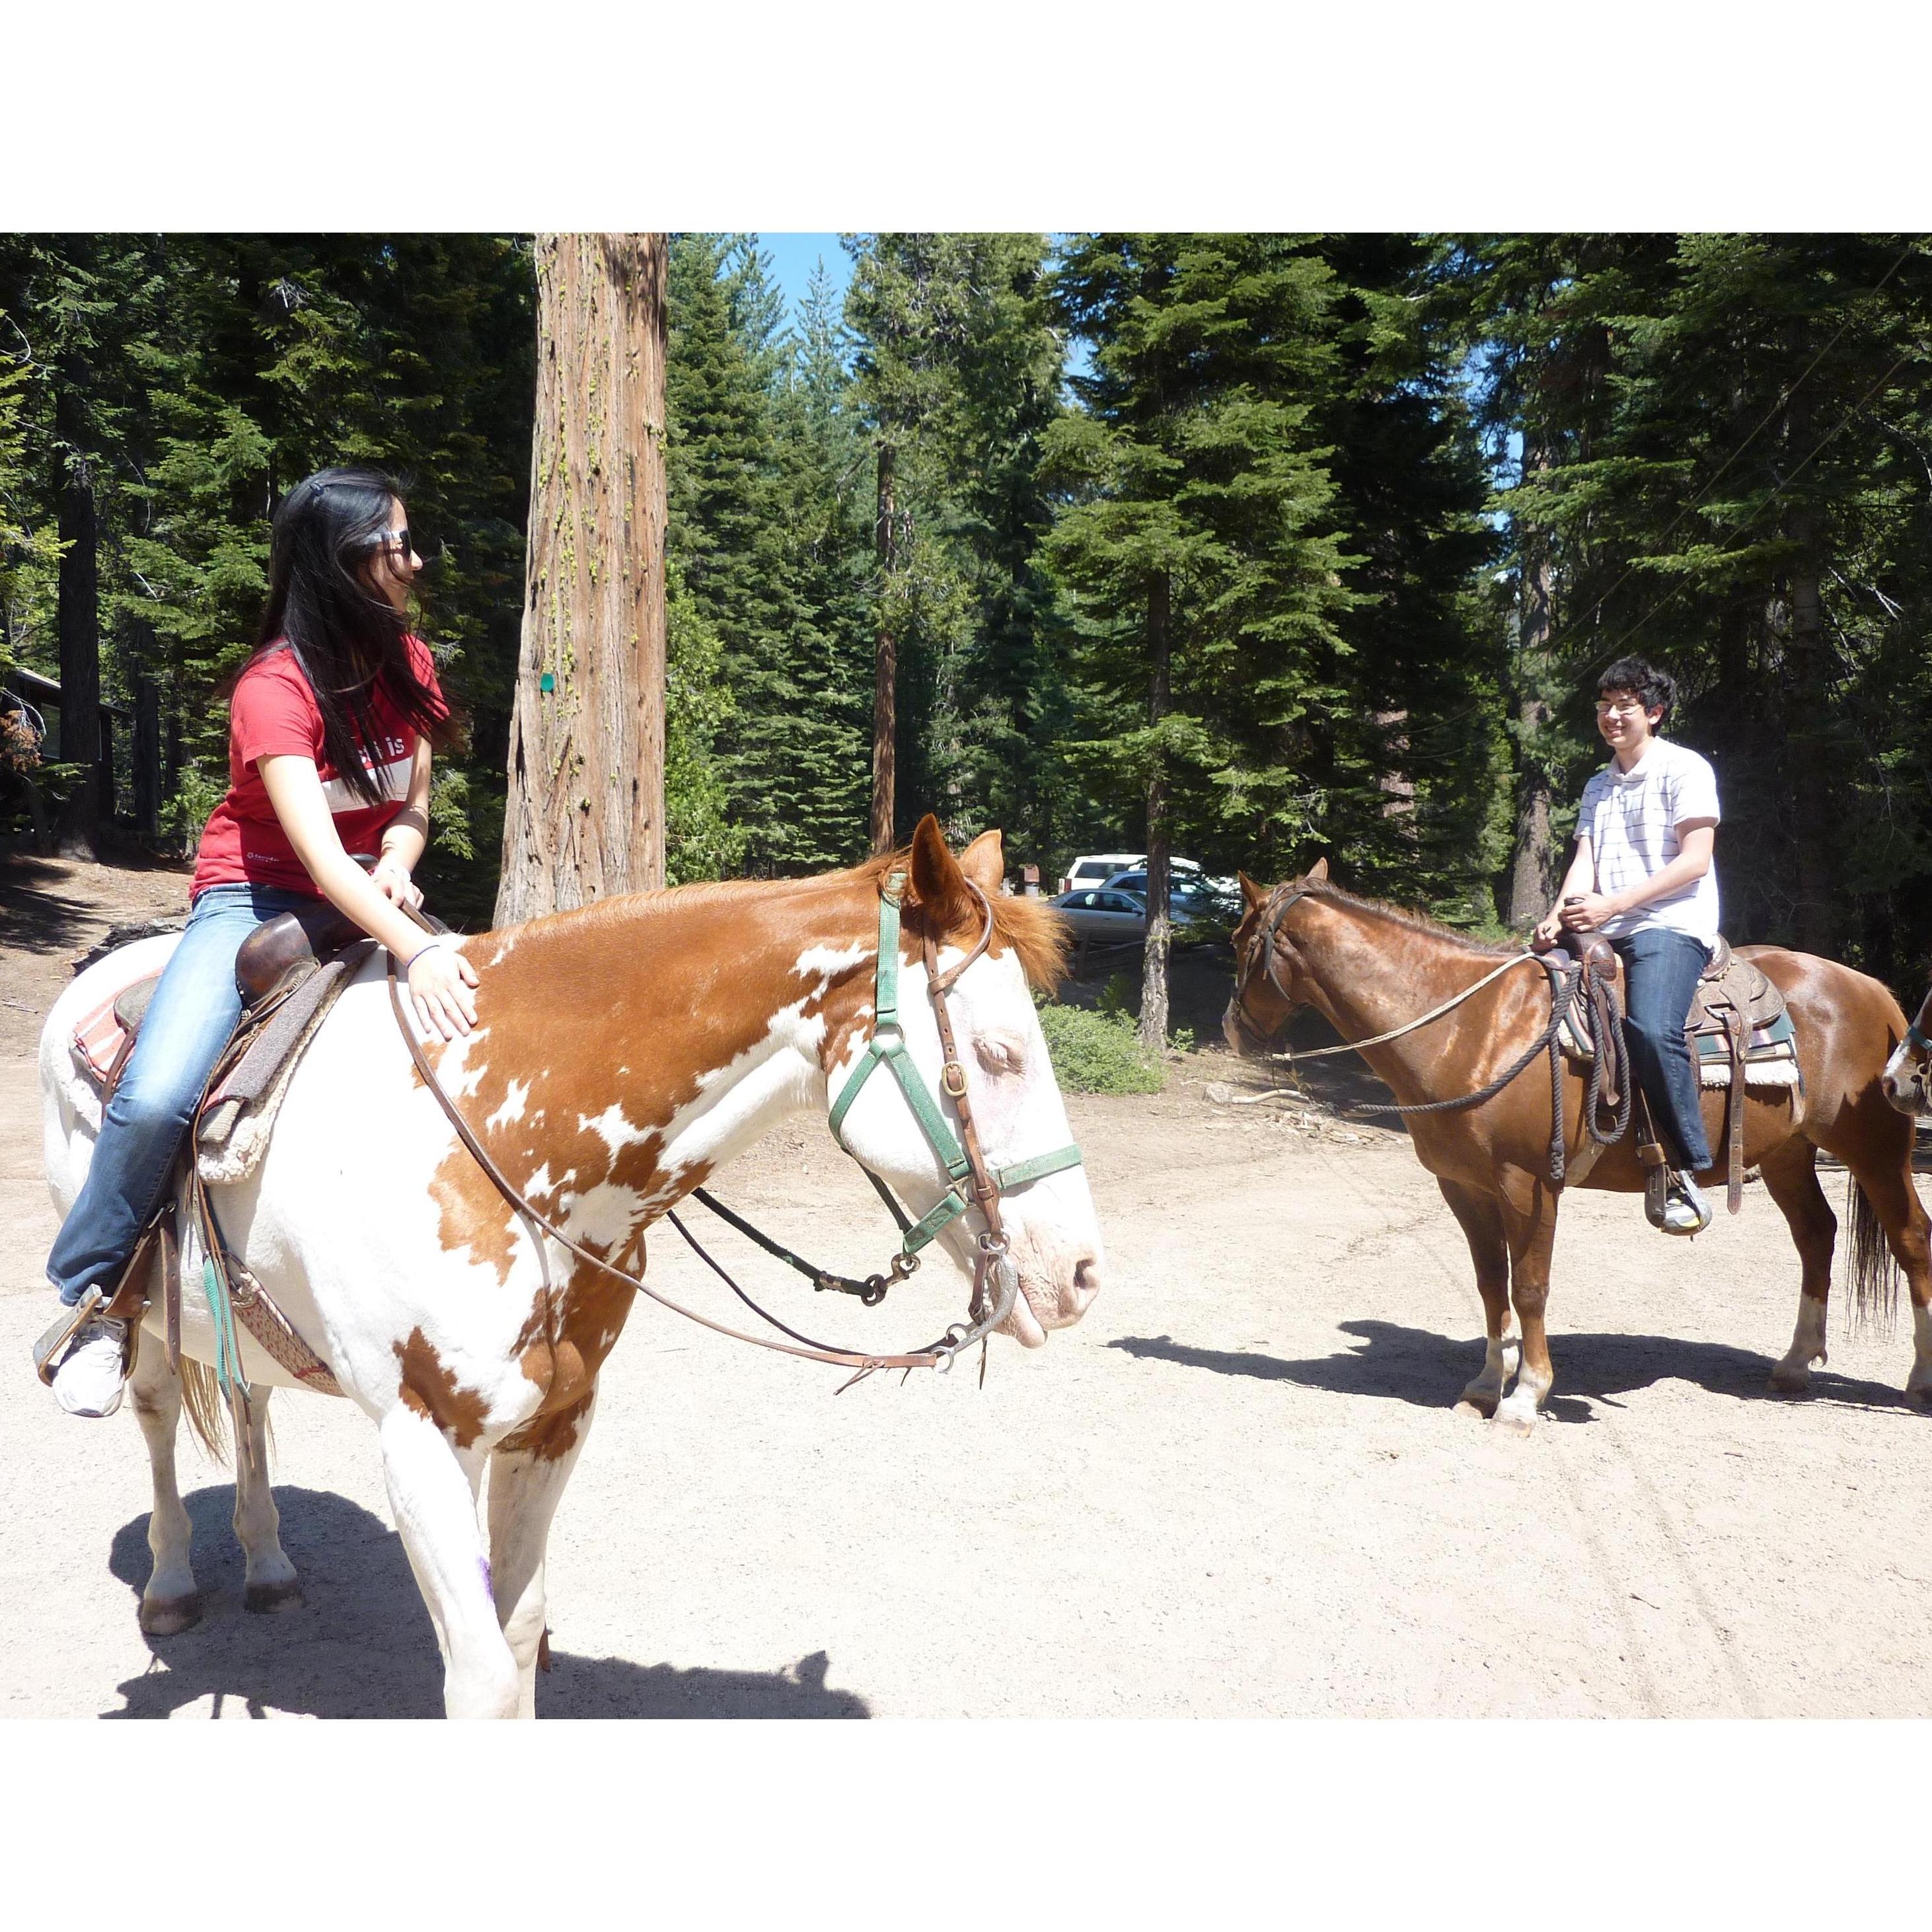 Trying out horseback riding for the first time (June 2013)